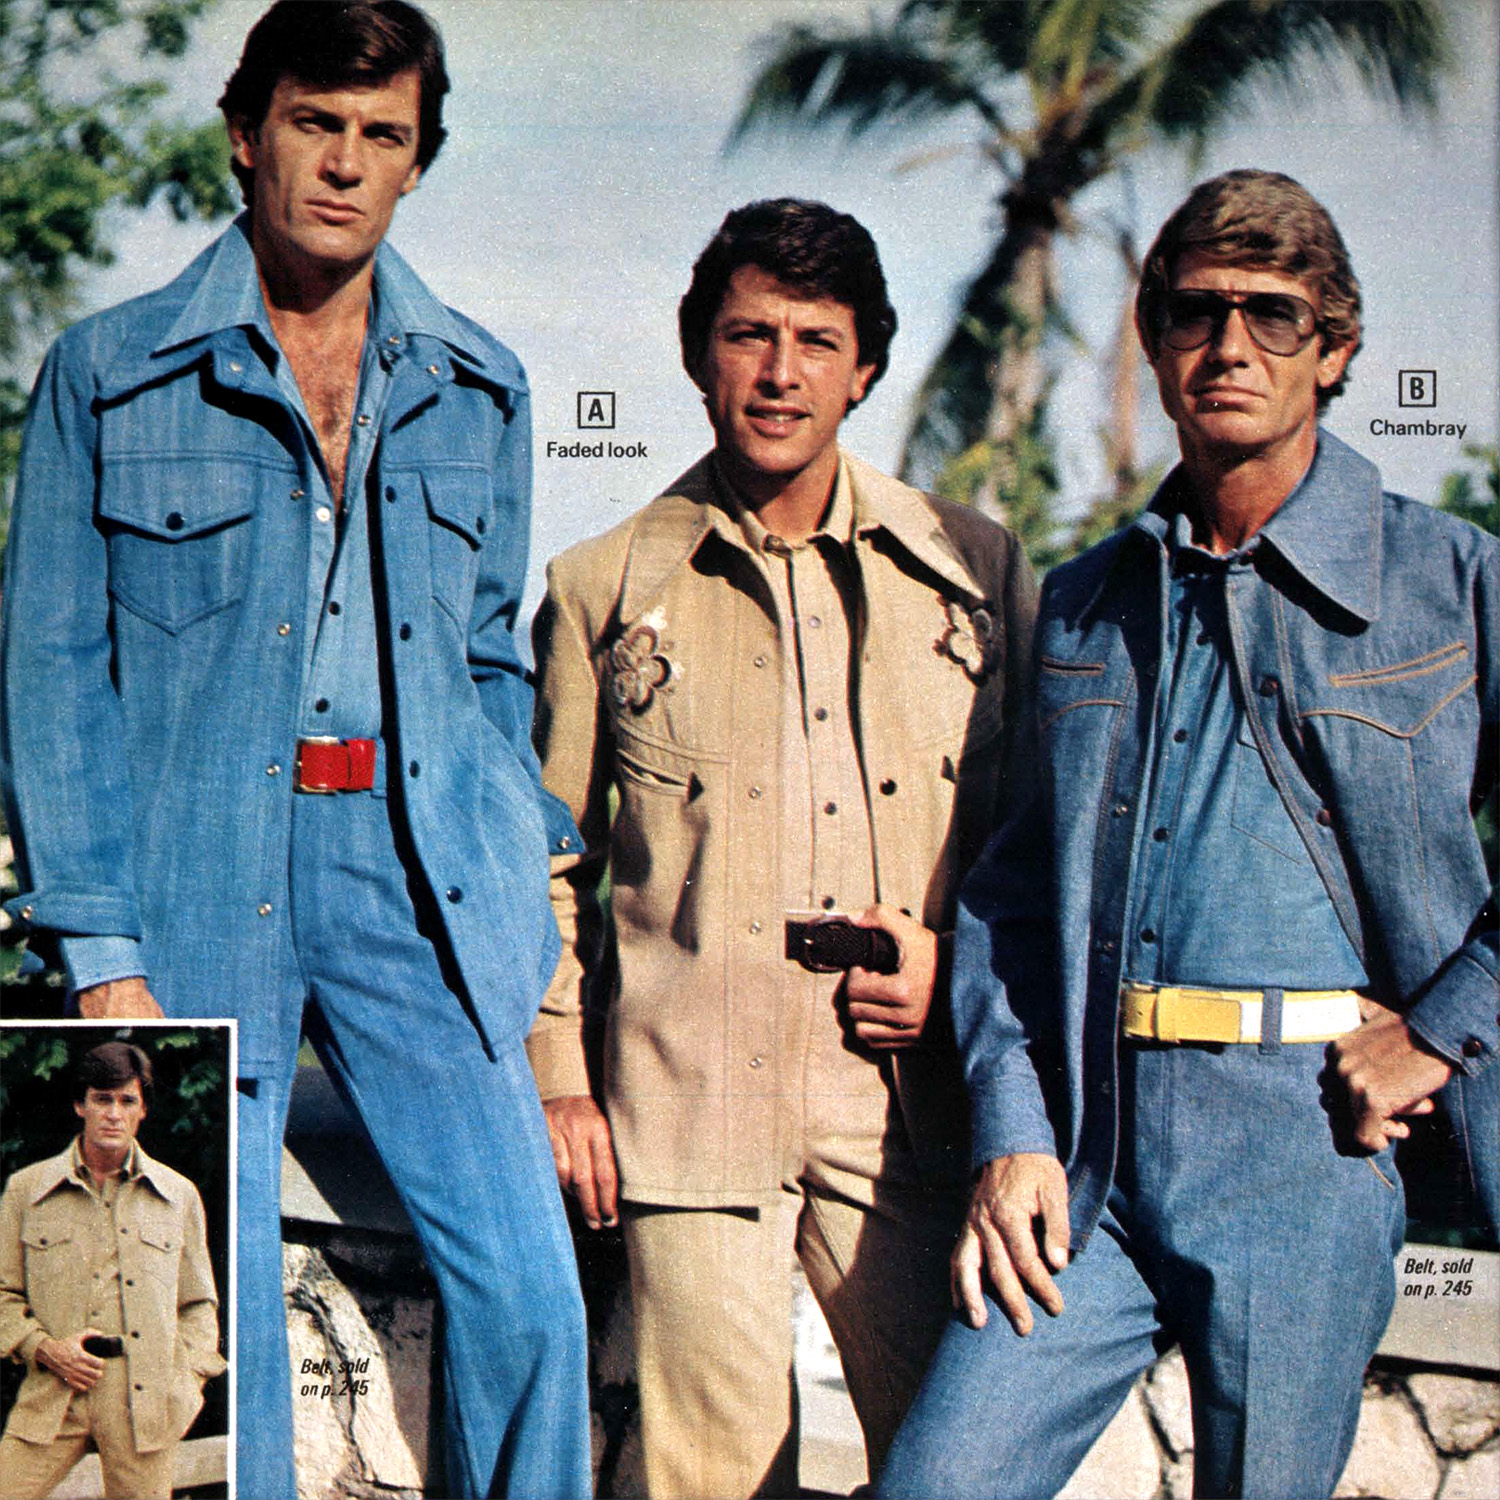 Huh Modish closet Decade of Denim: Jeans Ads and Fashions from the 1970s - Flashbak